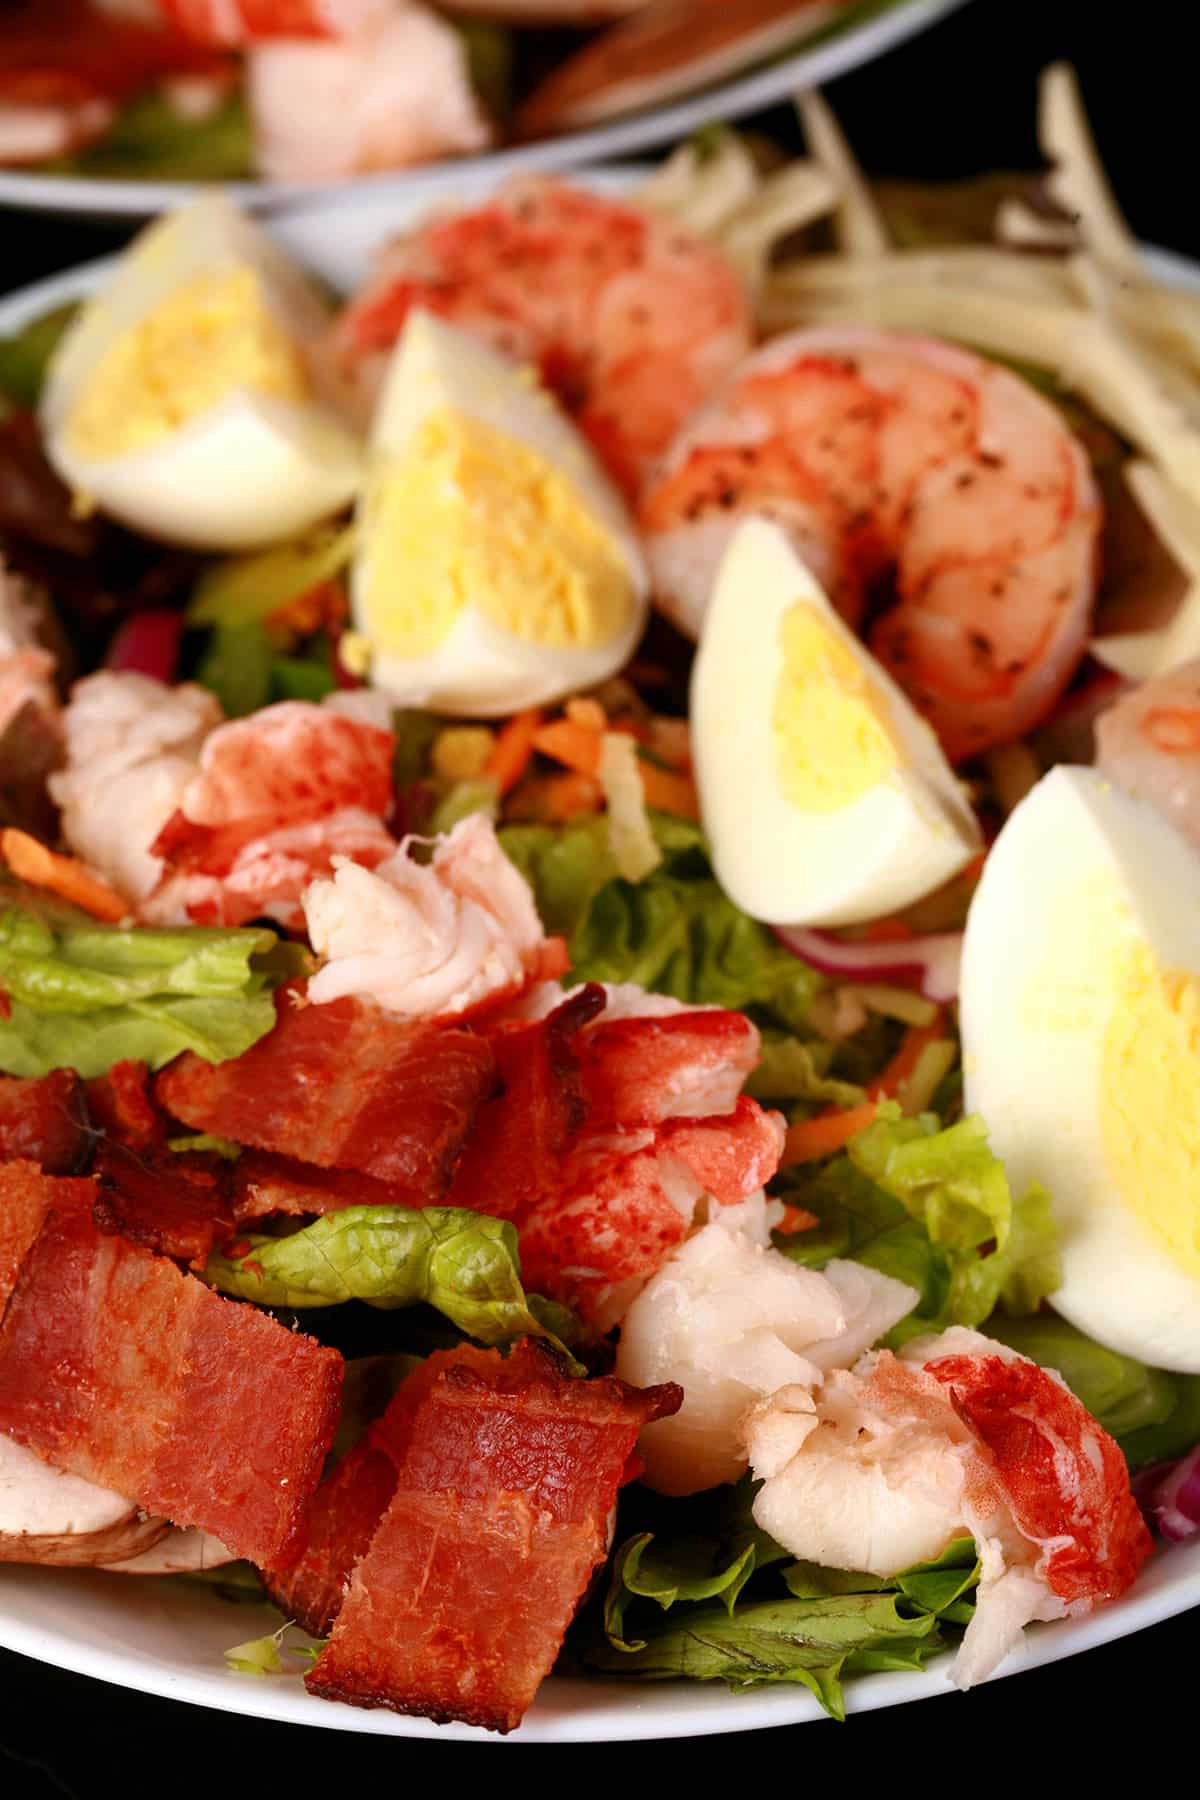 A seafood cobb salad, with shrimp and lobster laid out in rows with boiled eggs and other ingredients.